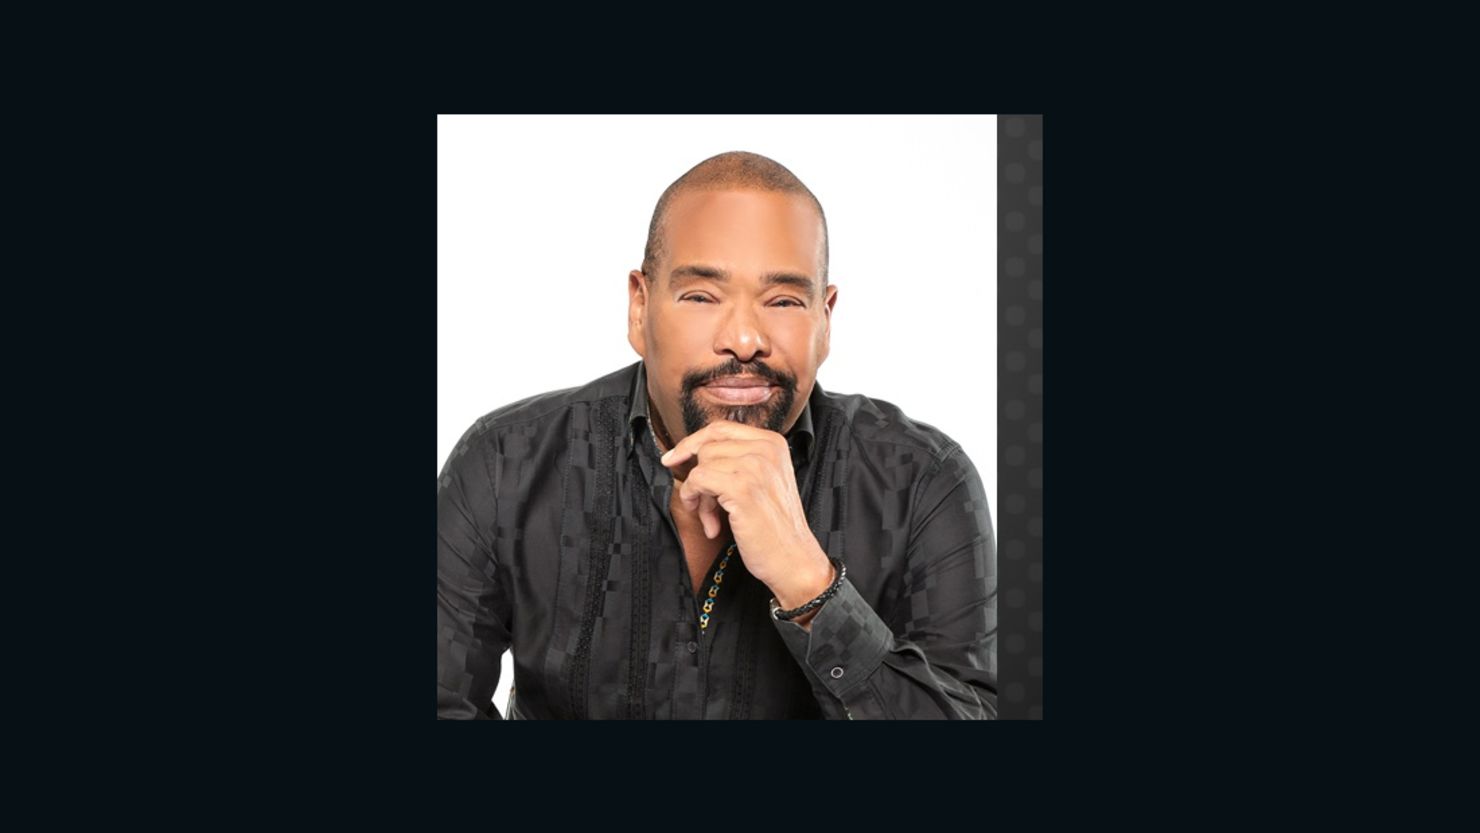 Doug Banks was a popular syndicated radio host for three decades.